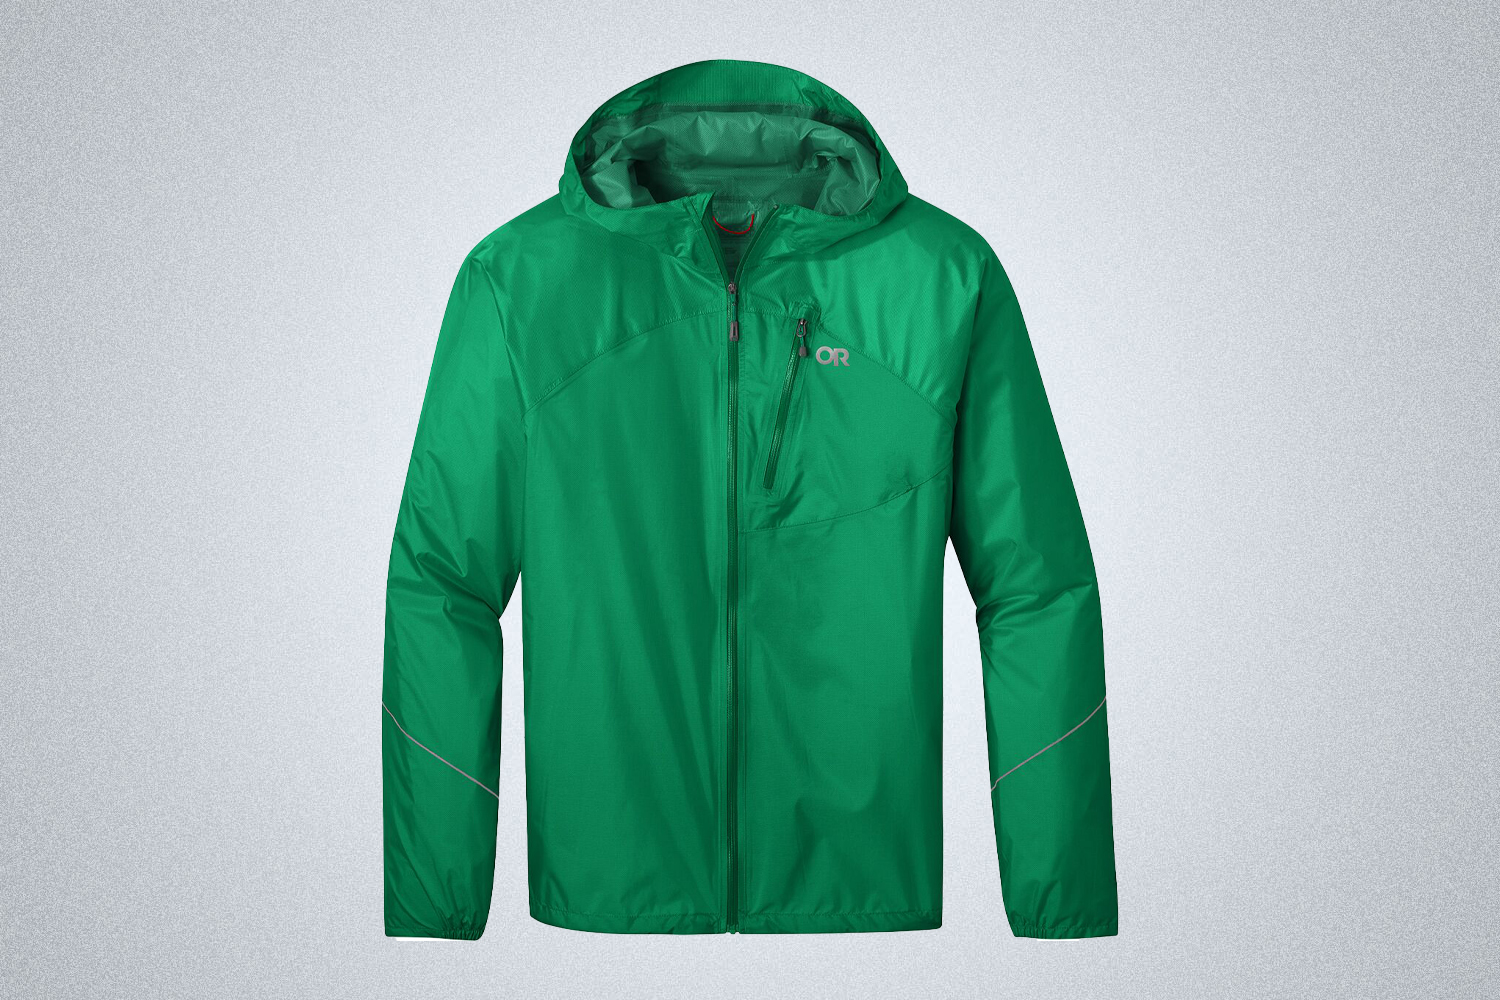 The Outdoor Research Helium Rain Jacket in green, on sale from the Backcountry Memorial Day Sale